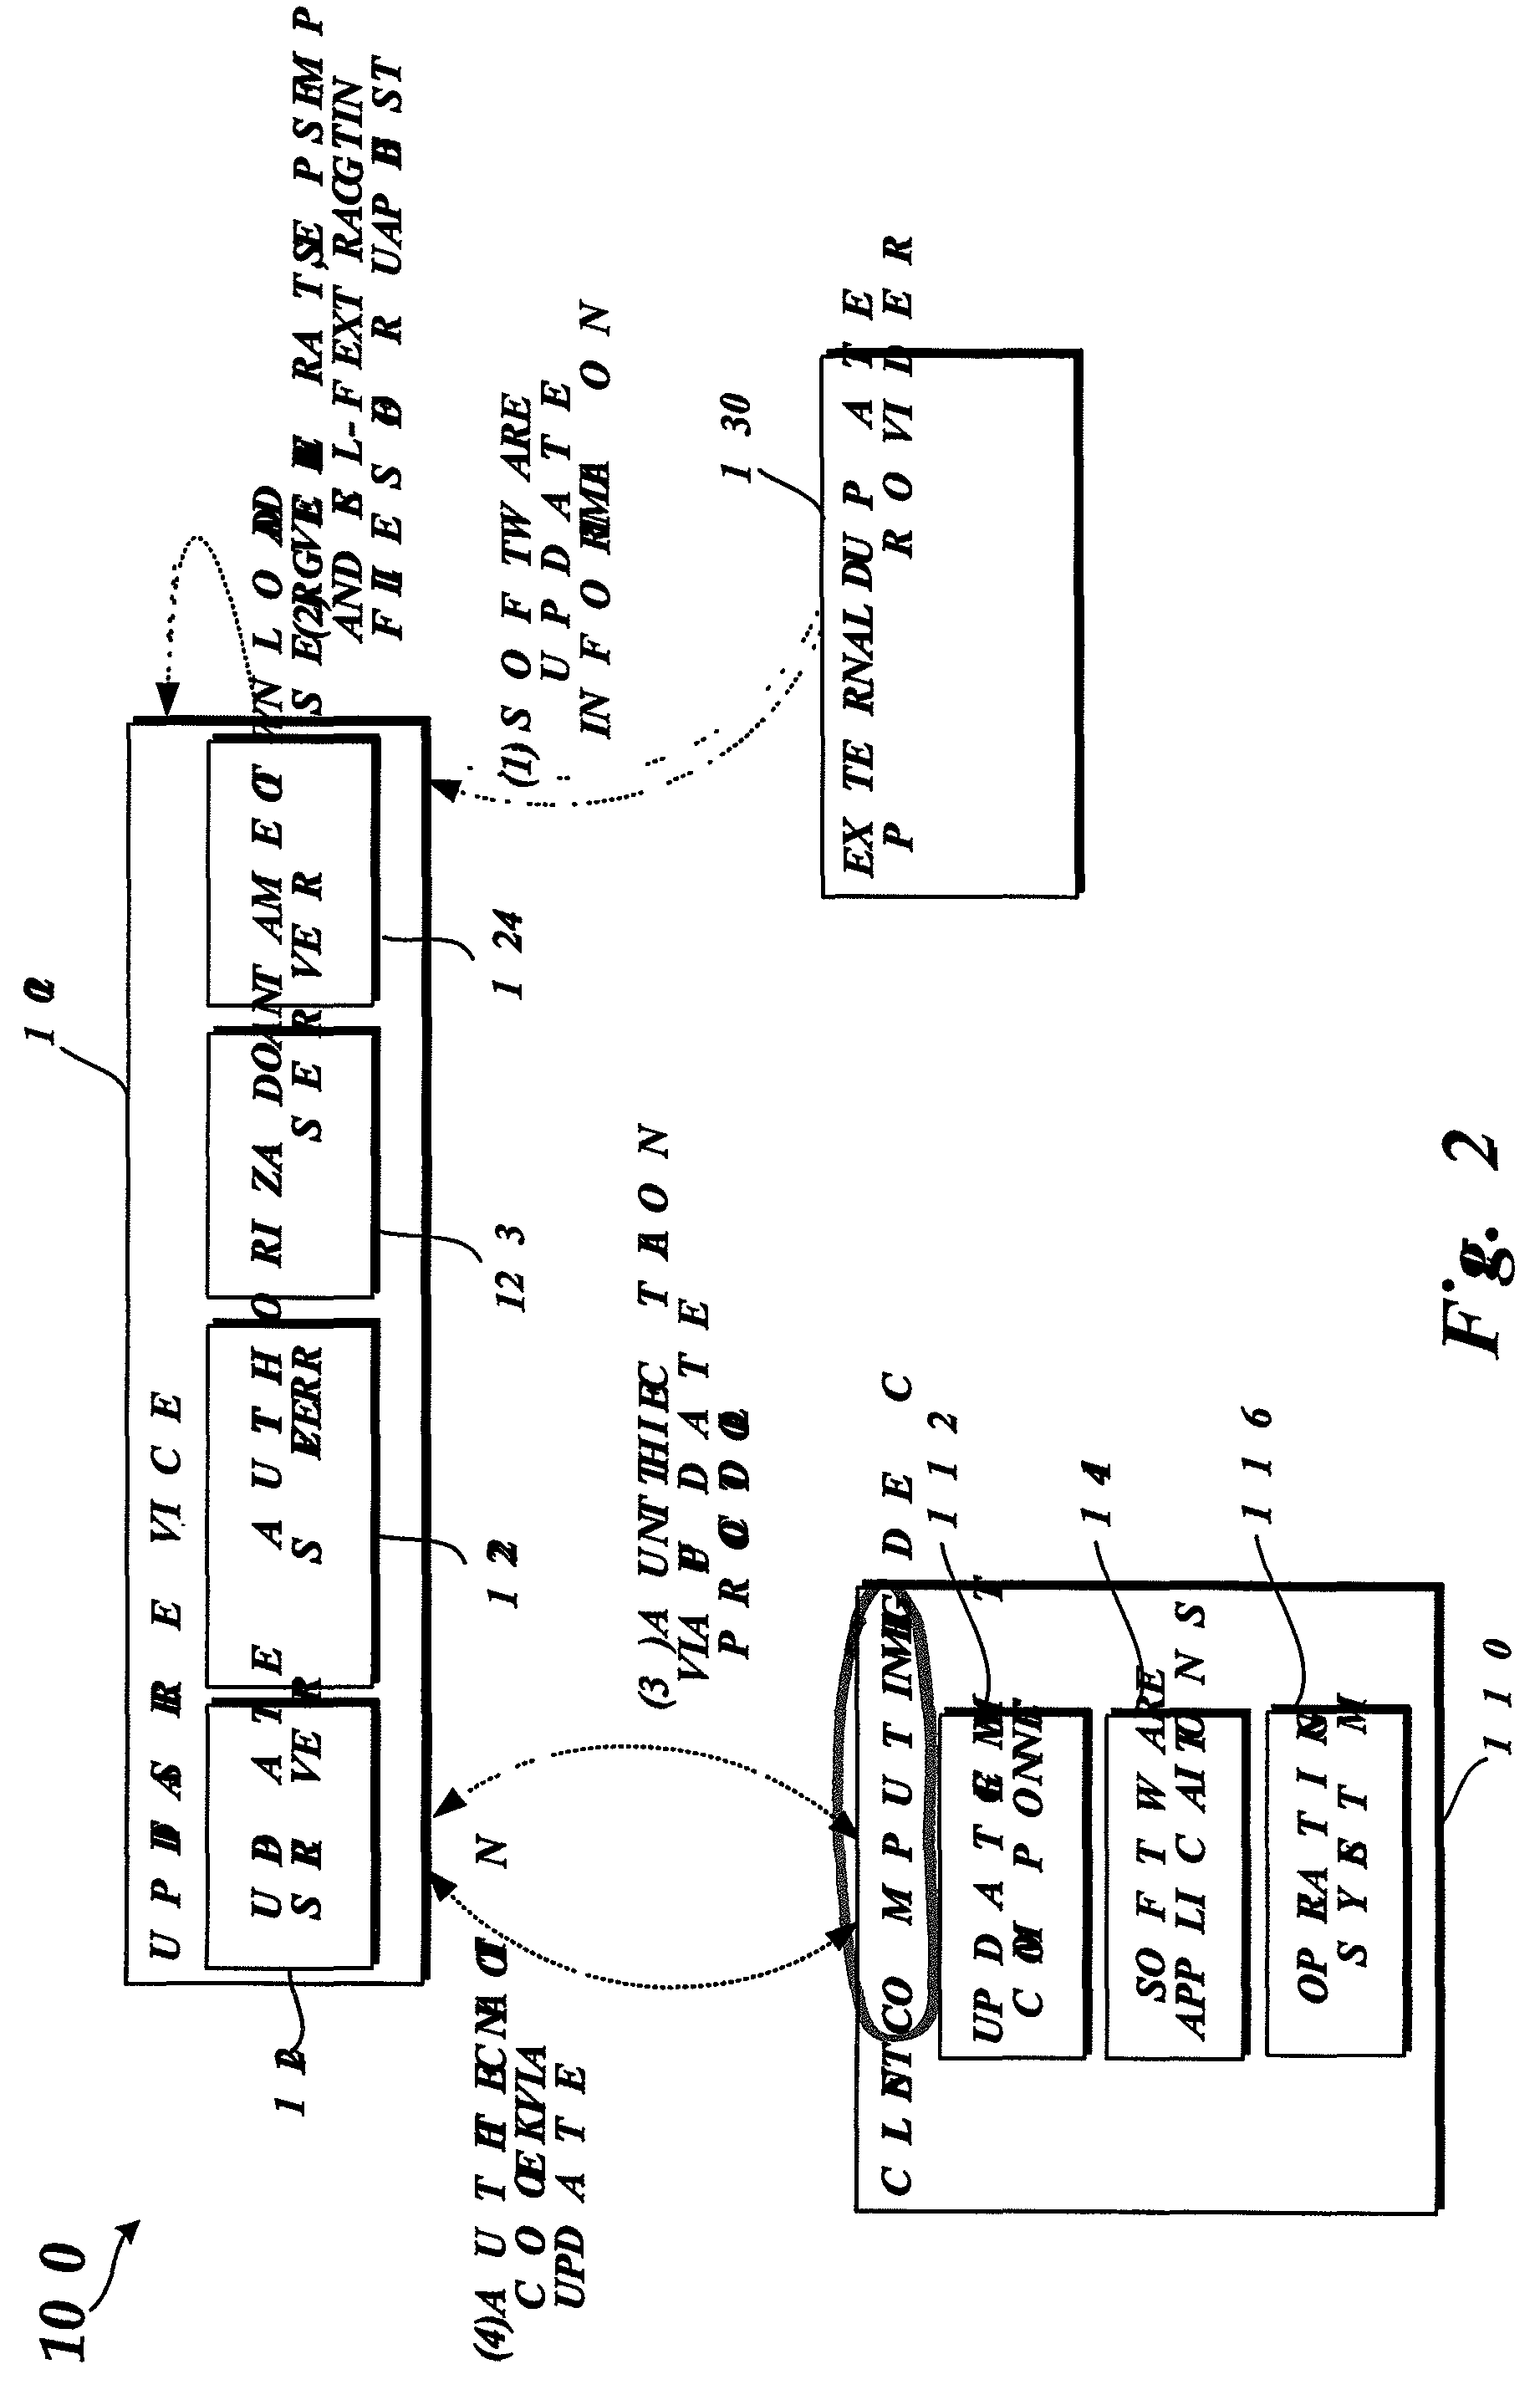 System and method for managing and communicating software updates